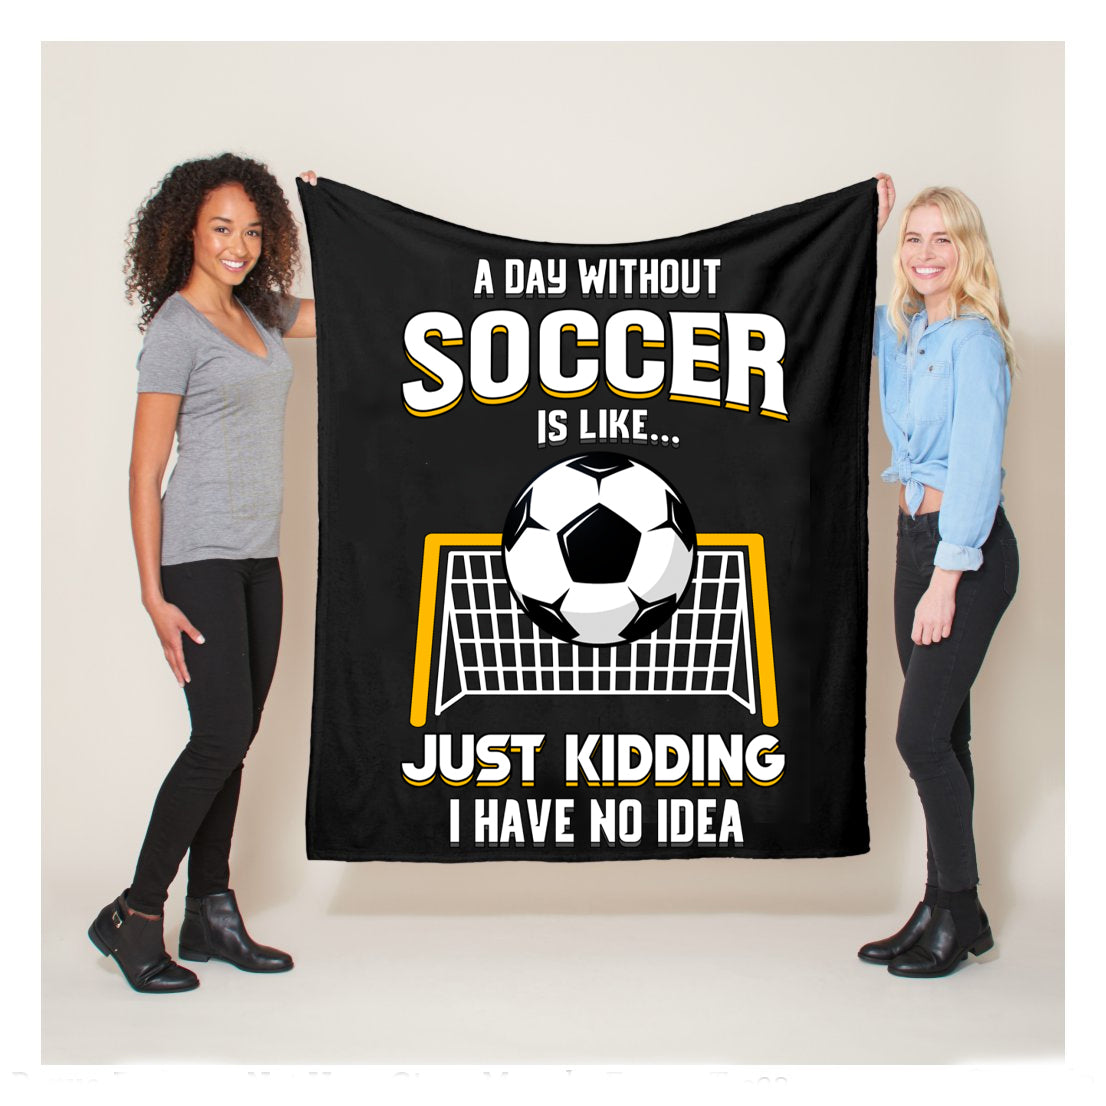 A Day Without Soccer Is Like Just Kidding I Have No Idea Fleece Blanket,  Soccer Outdoor Blankets, Soccer Gifts For Coach And Soccer Players, Birthday Gift For Soccer Player